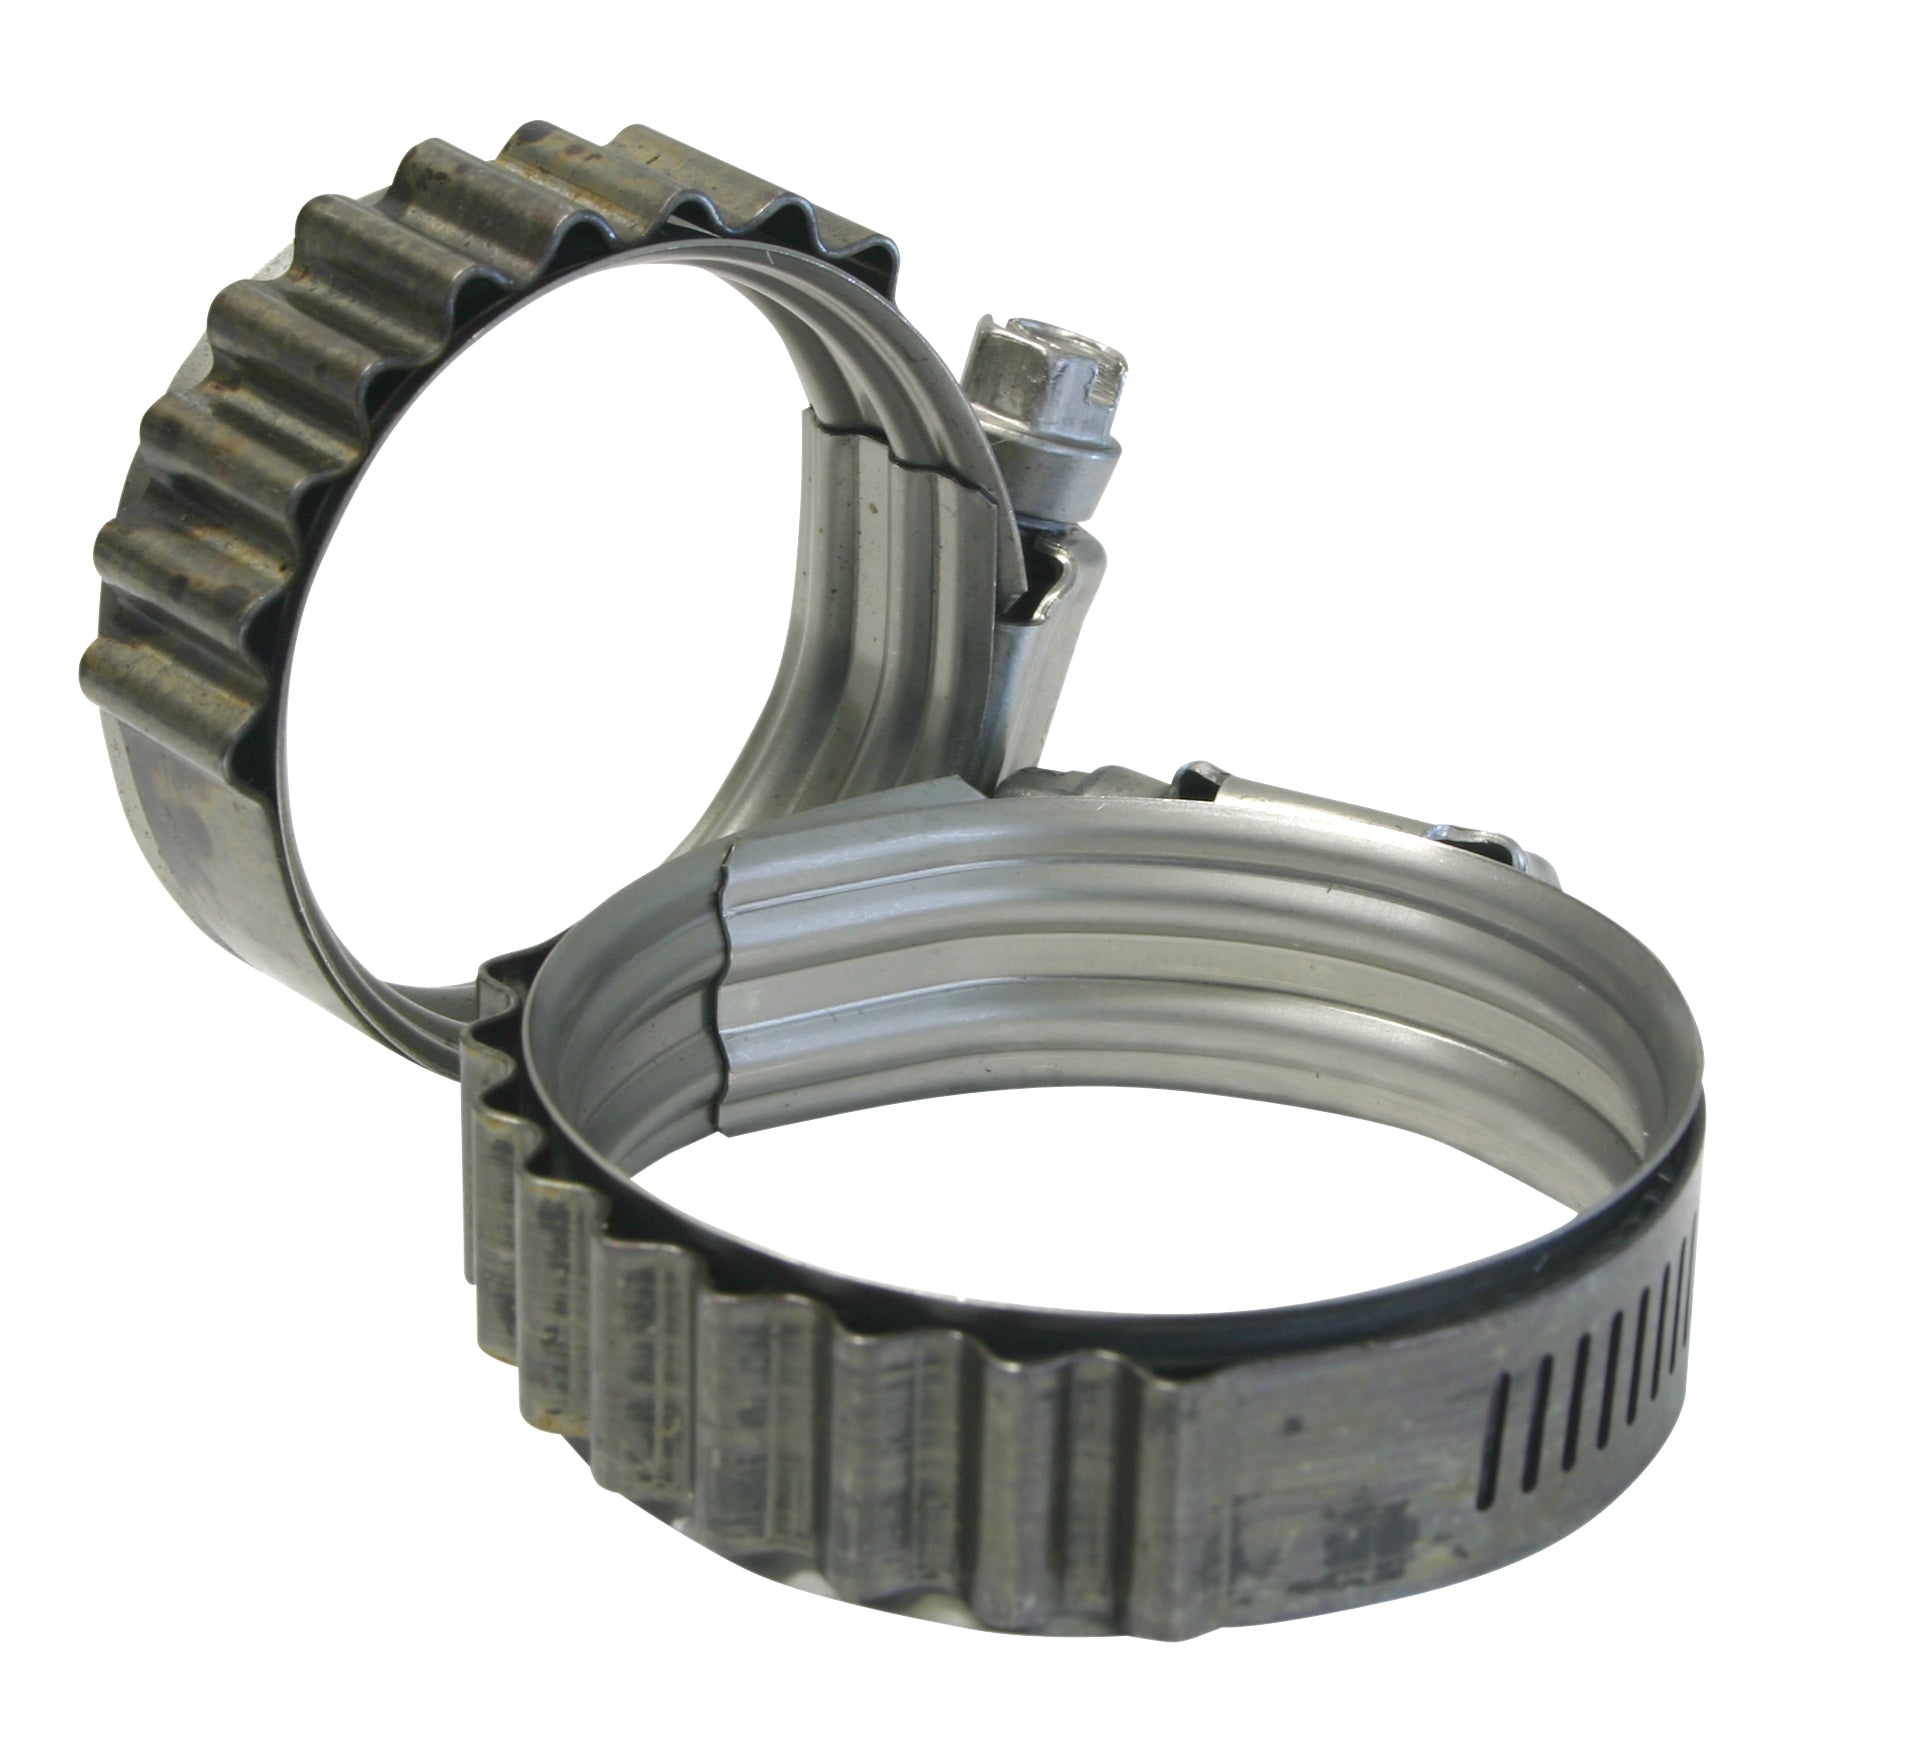 Turbo-Seal Constant Tension Clamps 2.500-3.375"